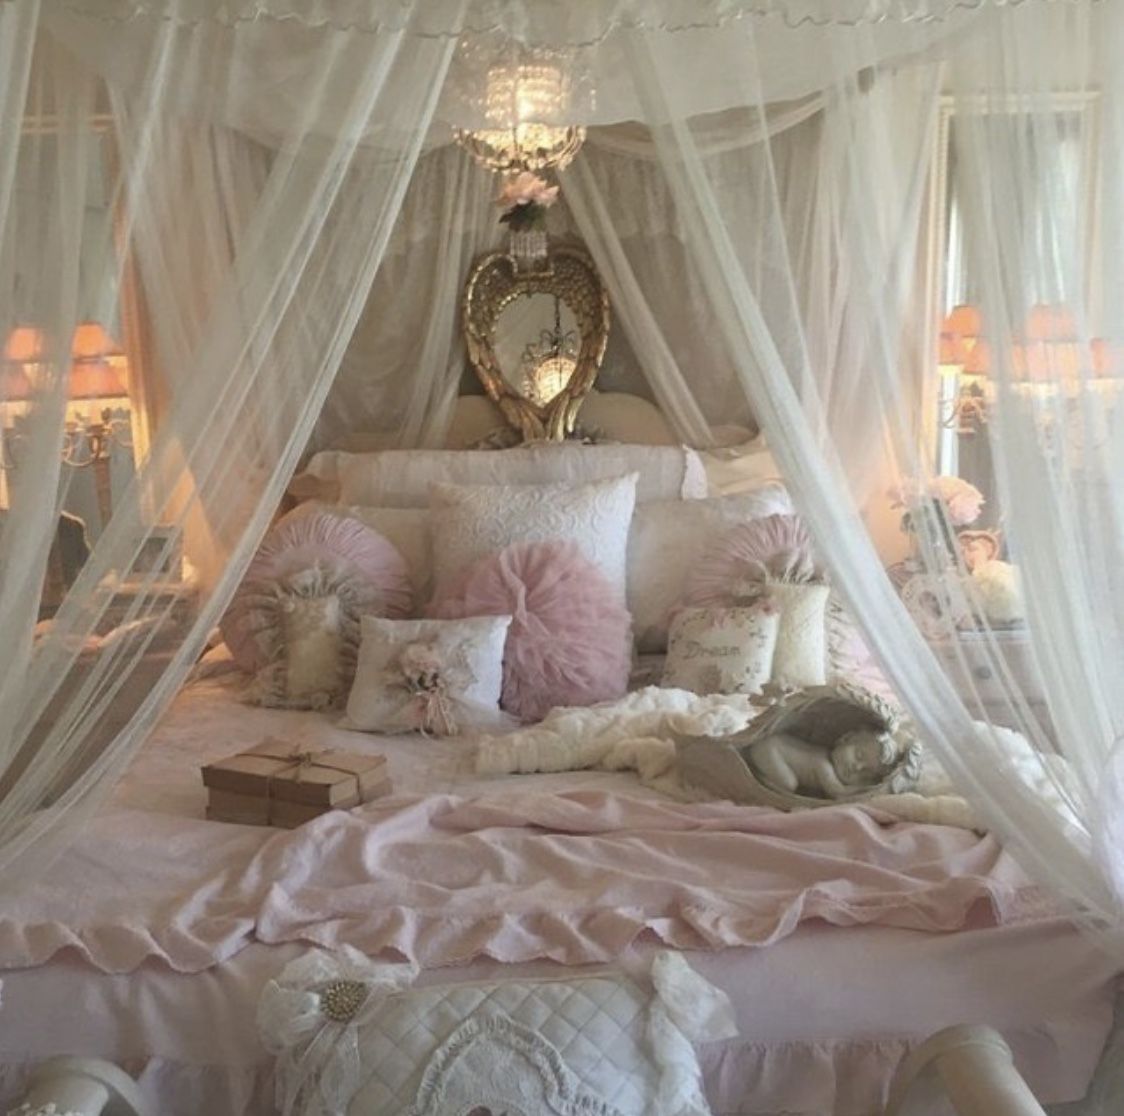 Creating a Magical Princess Bedroom for
Your Little One